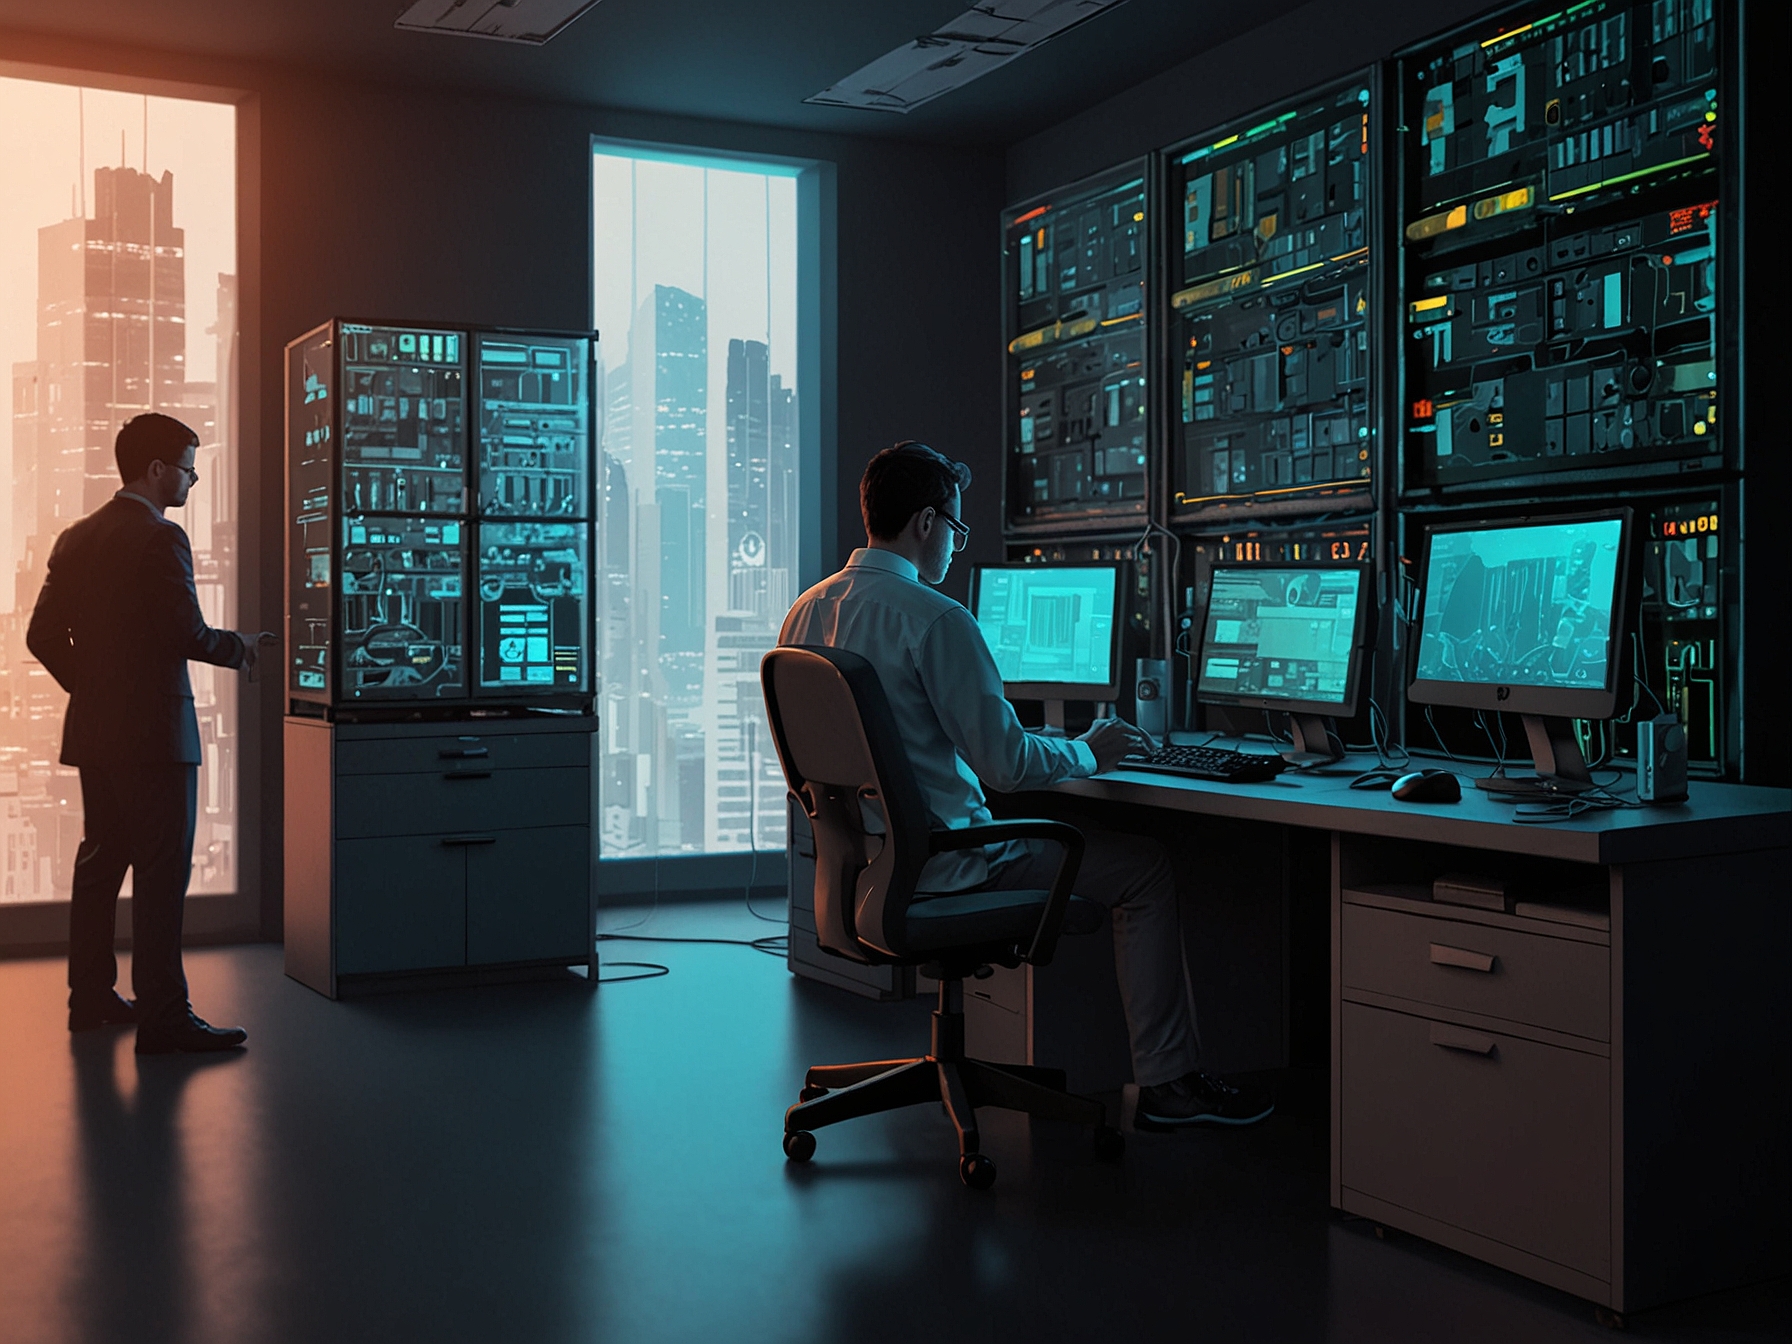 An illustration of a virtual lab setup with multiple virtual machines running different operating systems, showcasing the practice environment for ethical hacking and penetration testing techniques.